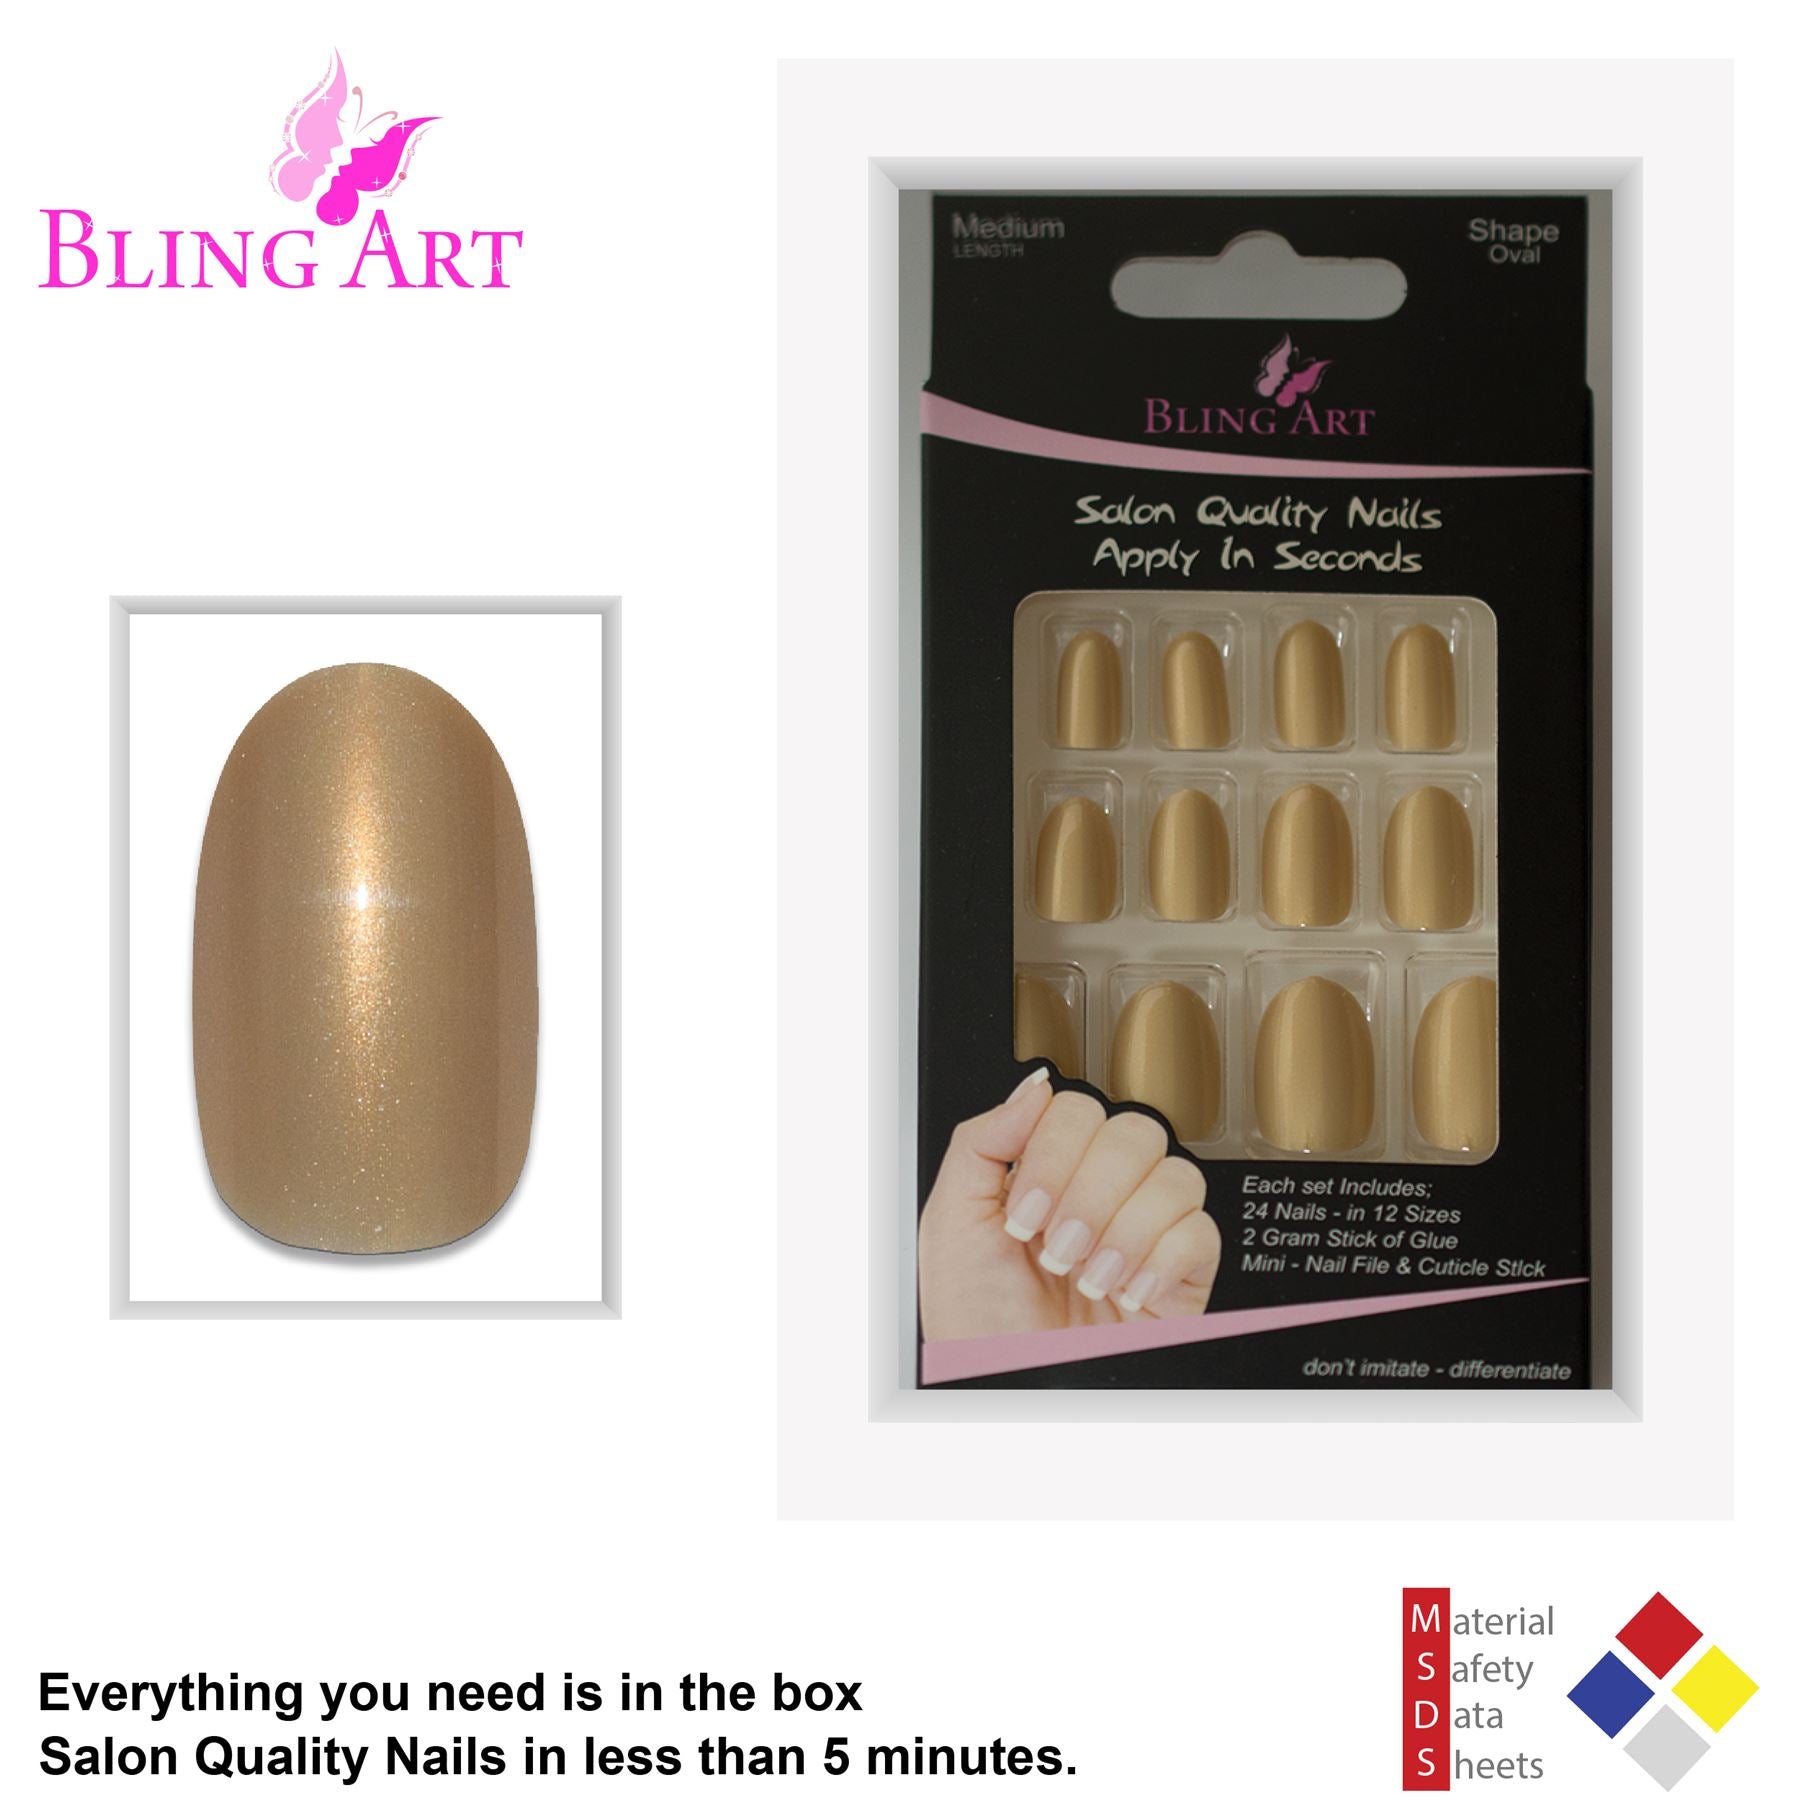 False Nails by Bling Art Gold Glitter Oval Medium Fake Acrylic 24 Tips with Glue